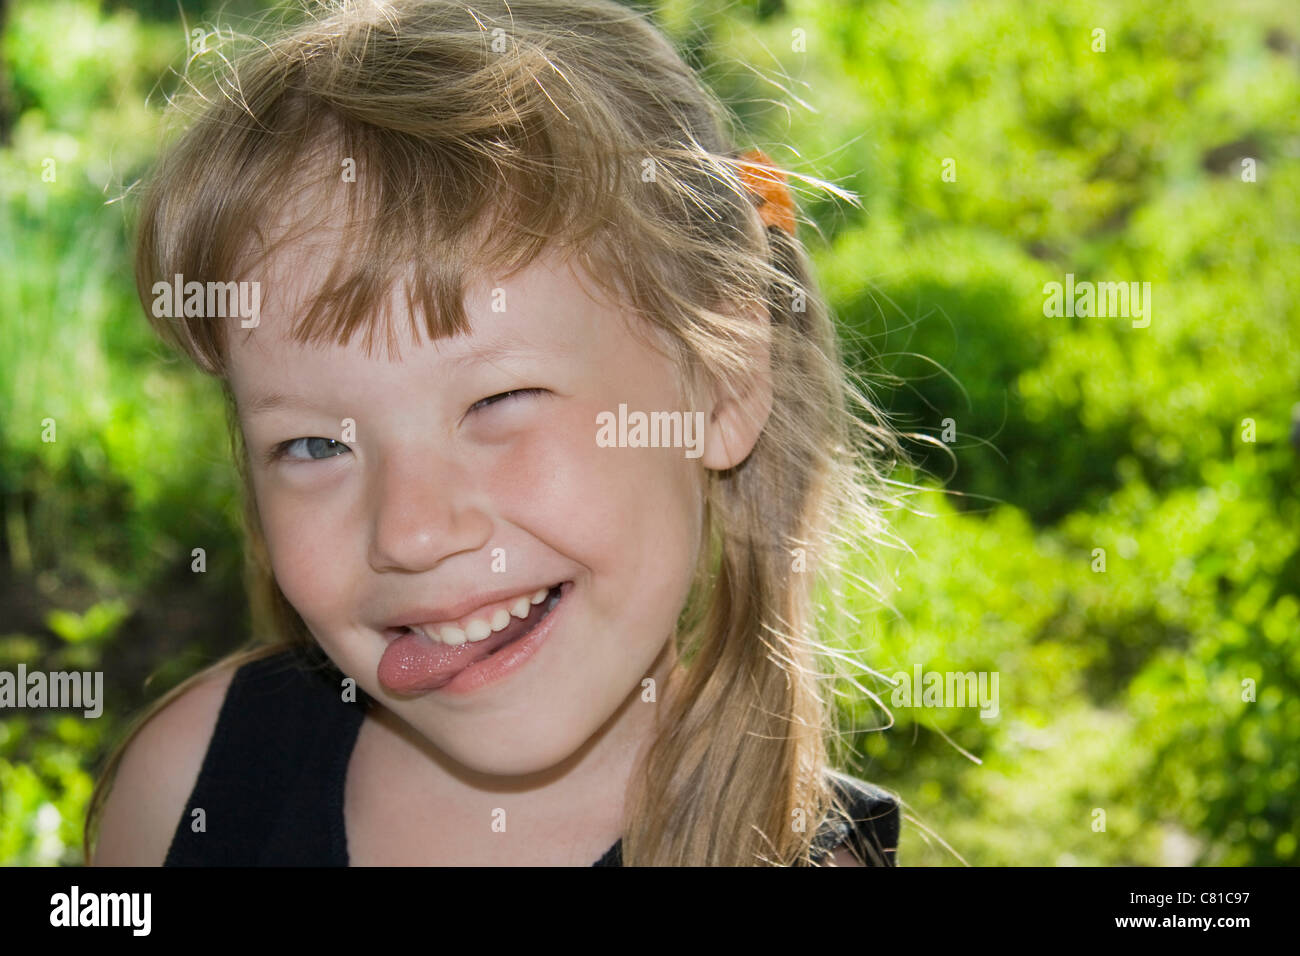 Little girl grimaces and sticking out tongue. Stock Photo